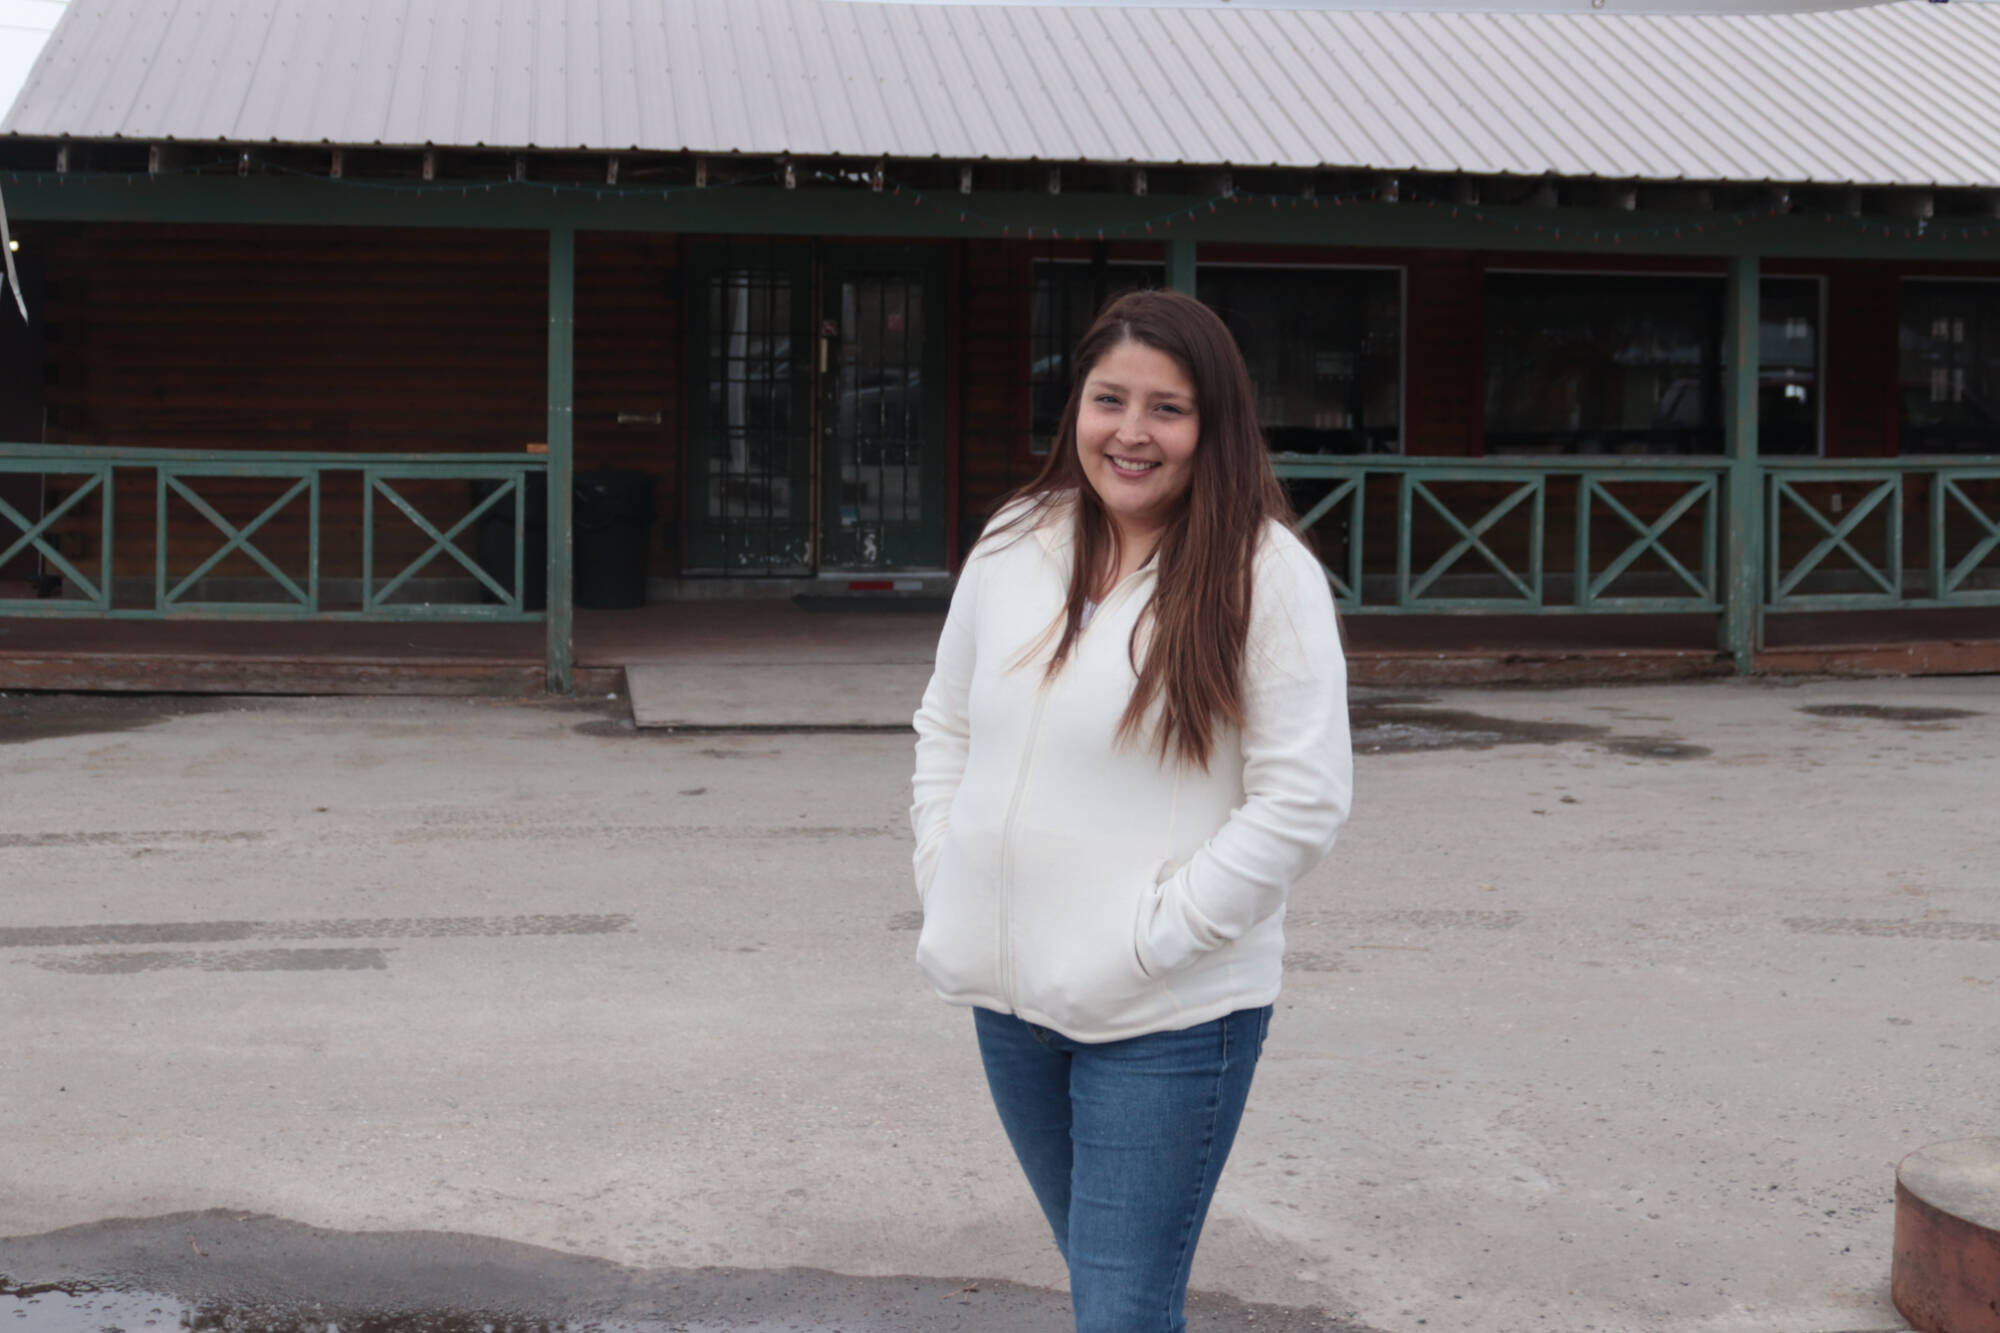 Erica Clark and her husband and brother have launched a new business venture, Six Mile Convenience Store, on Westside Road. The store had its first day of business Saturday, March 4, 2023. (Brendan Shykora - Morning Star)